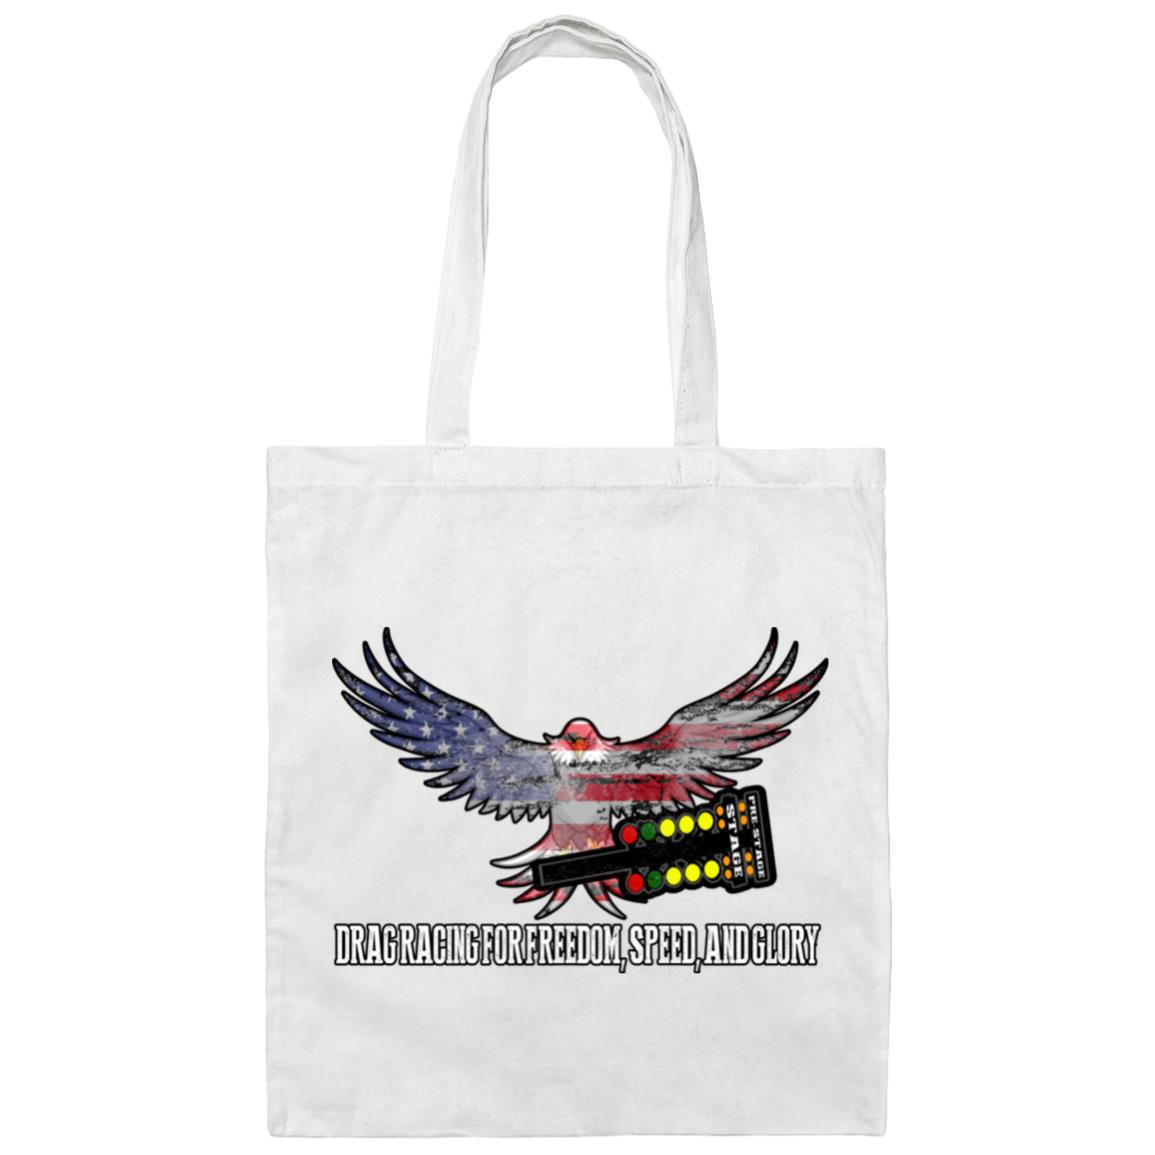 Drag Racing for Freedom, Speed, and Glory Canvas Tote Bag